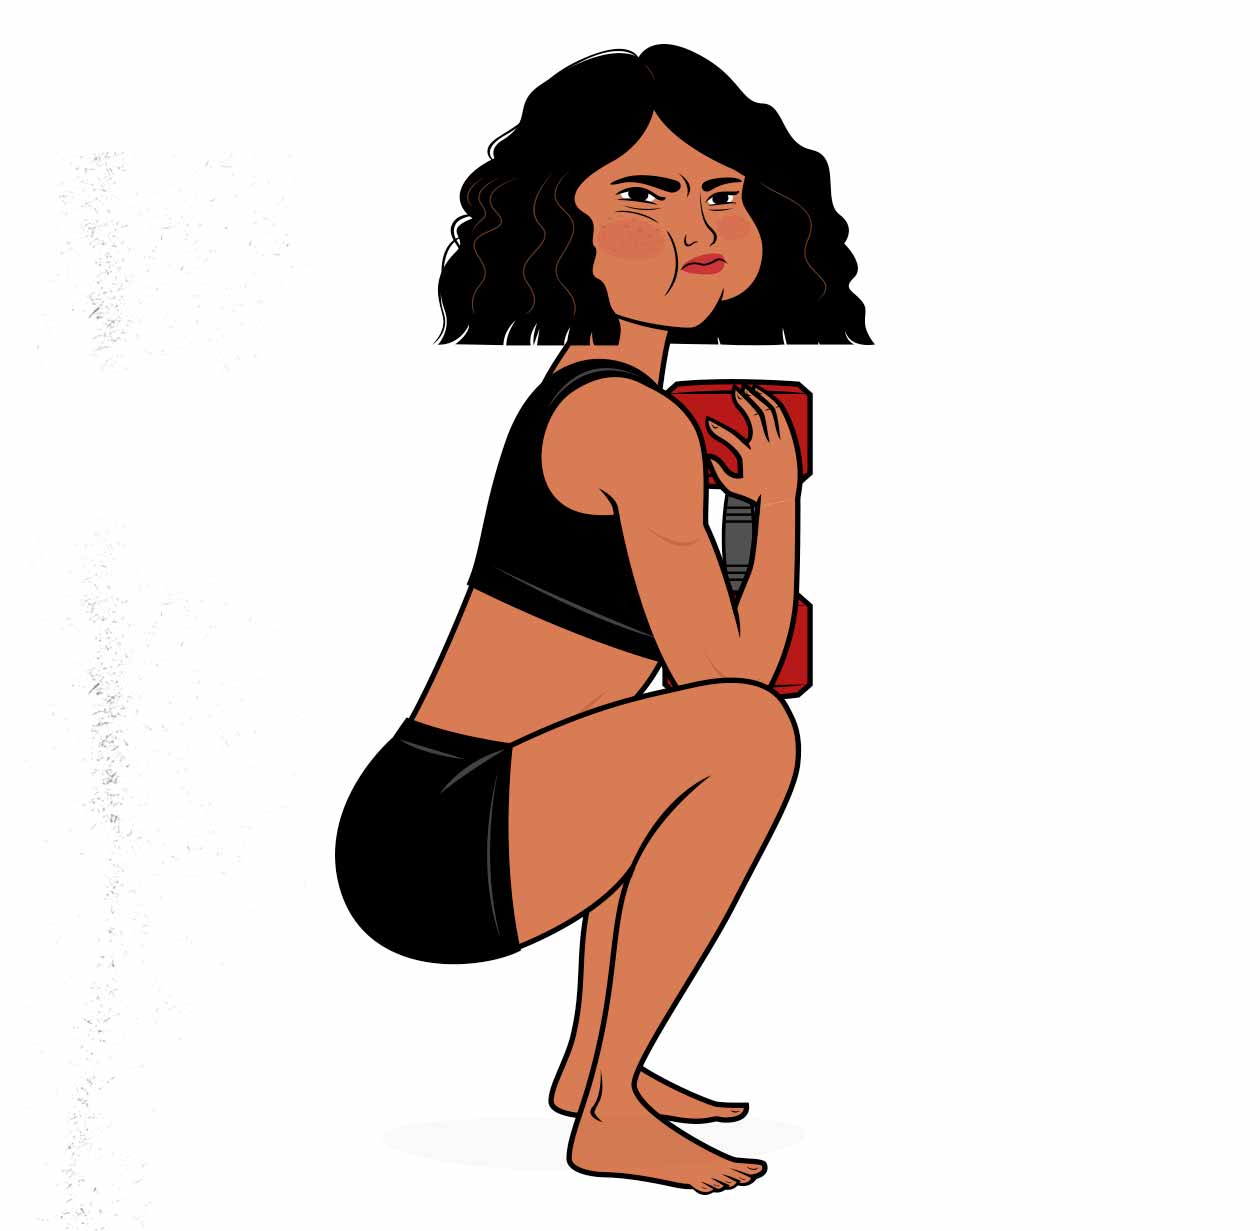 Illustration of a woman doing a deep "ass-to-grass" dumbbell goblet squat.